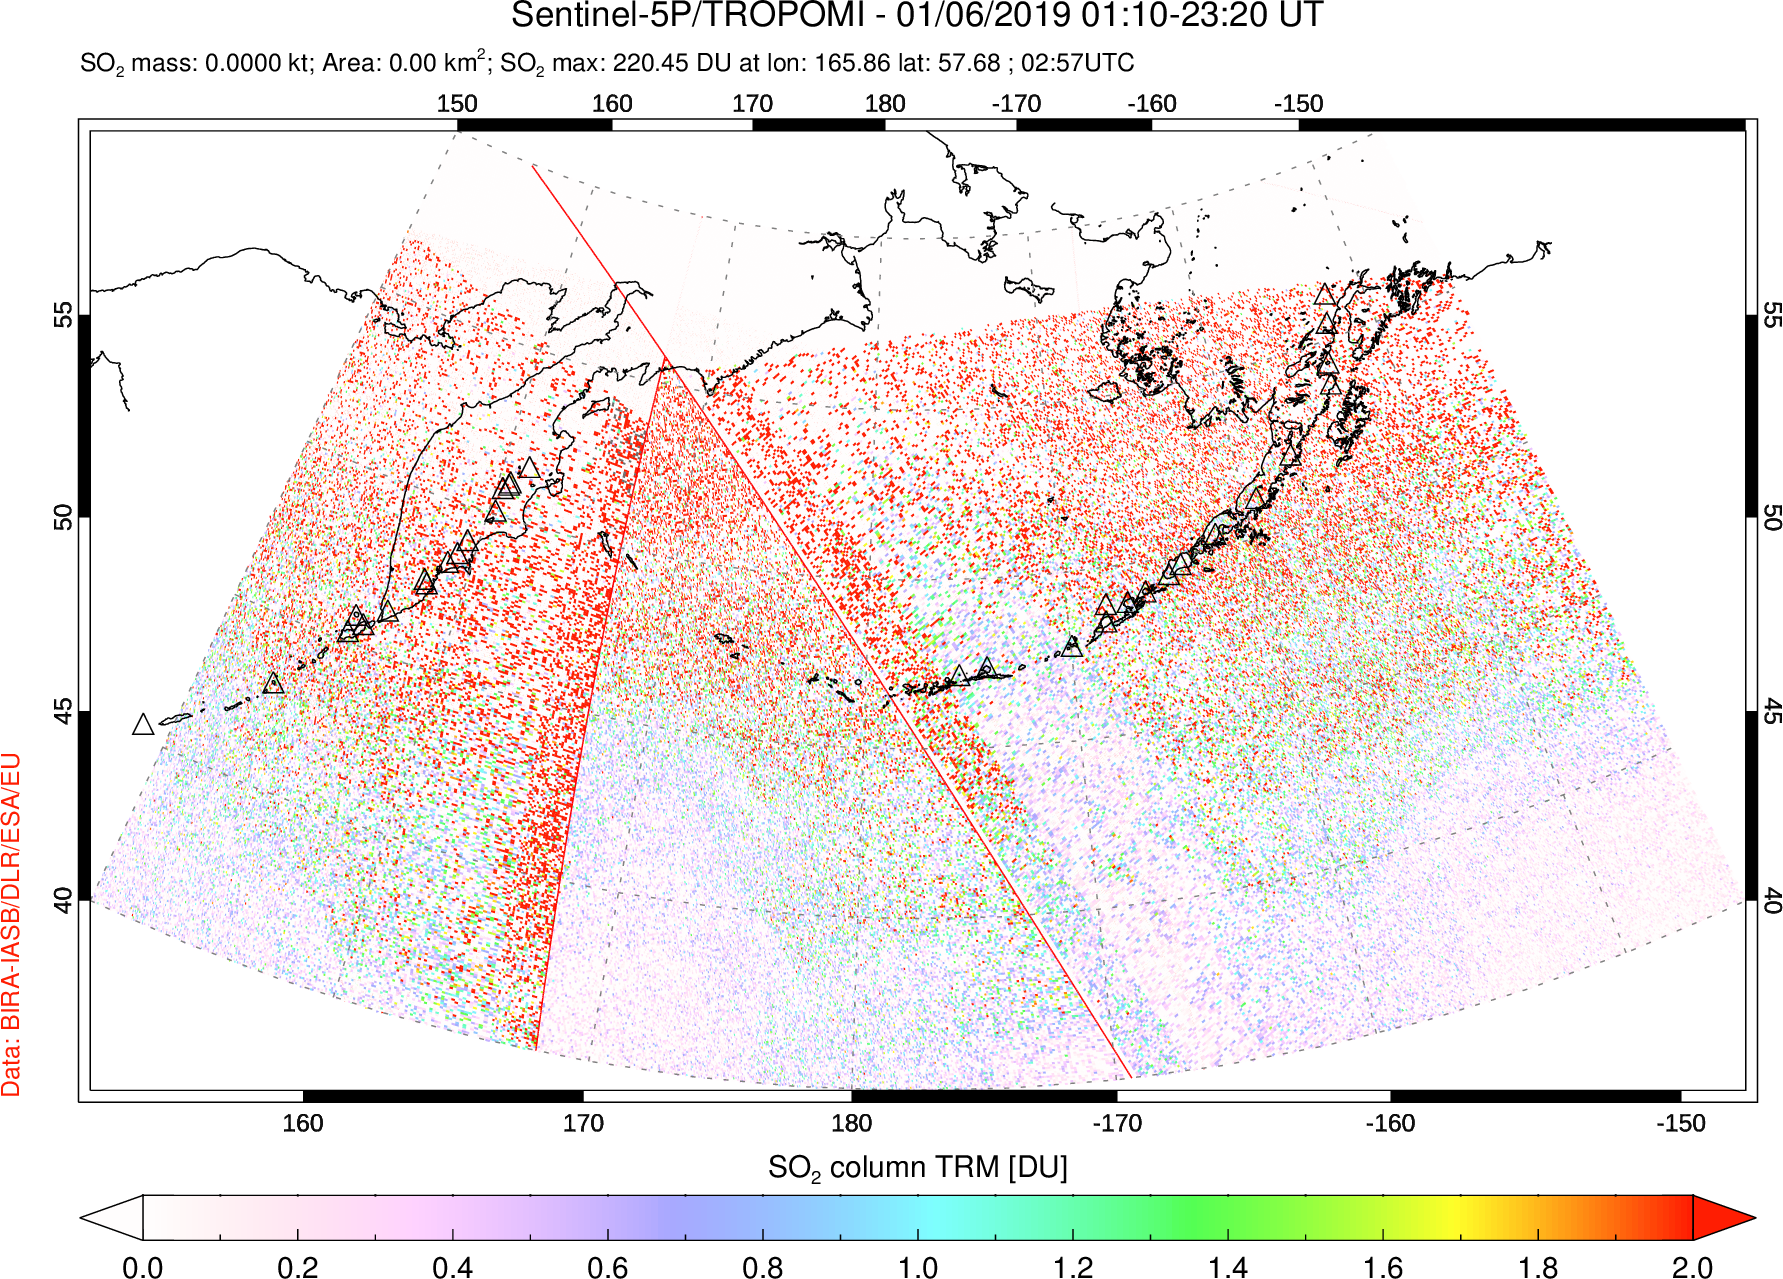 A sulfur dioxide image over North Pacific on Jan 06, 2019.